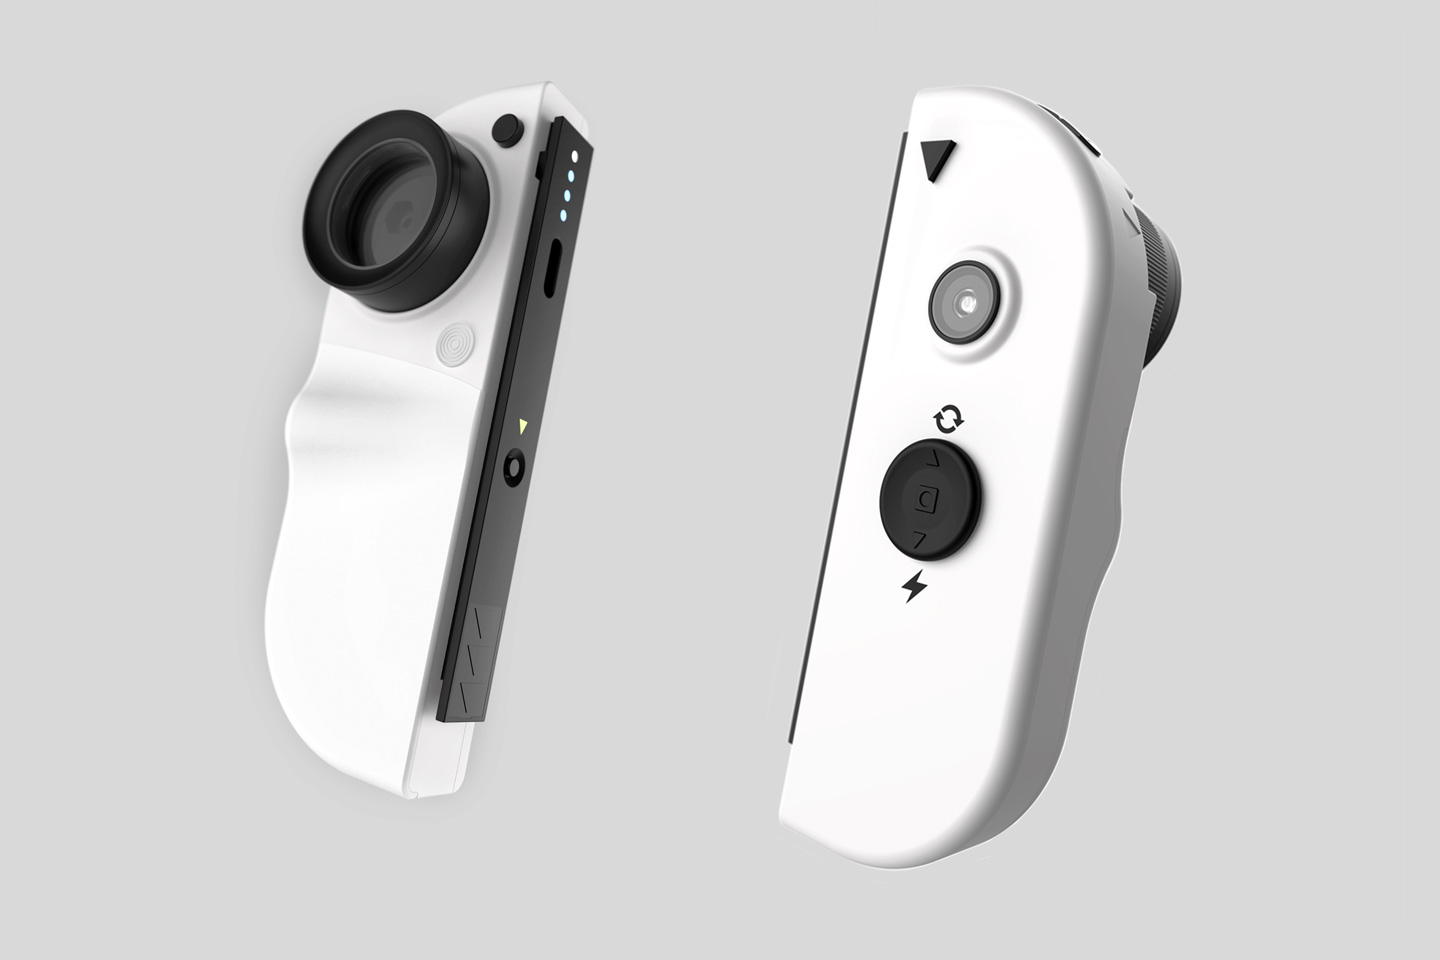 New Nintendo Switch Joy-Con has two cameras for gaming, streaming, and photography - Design